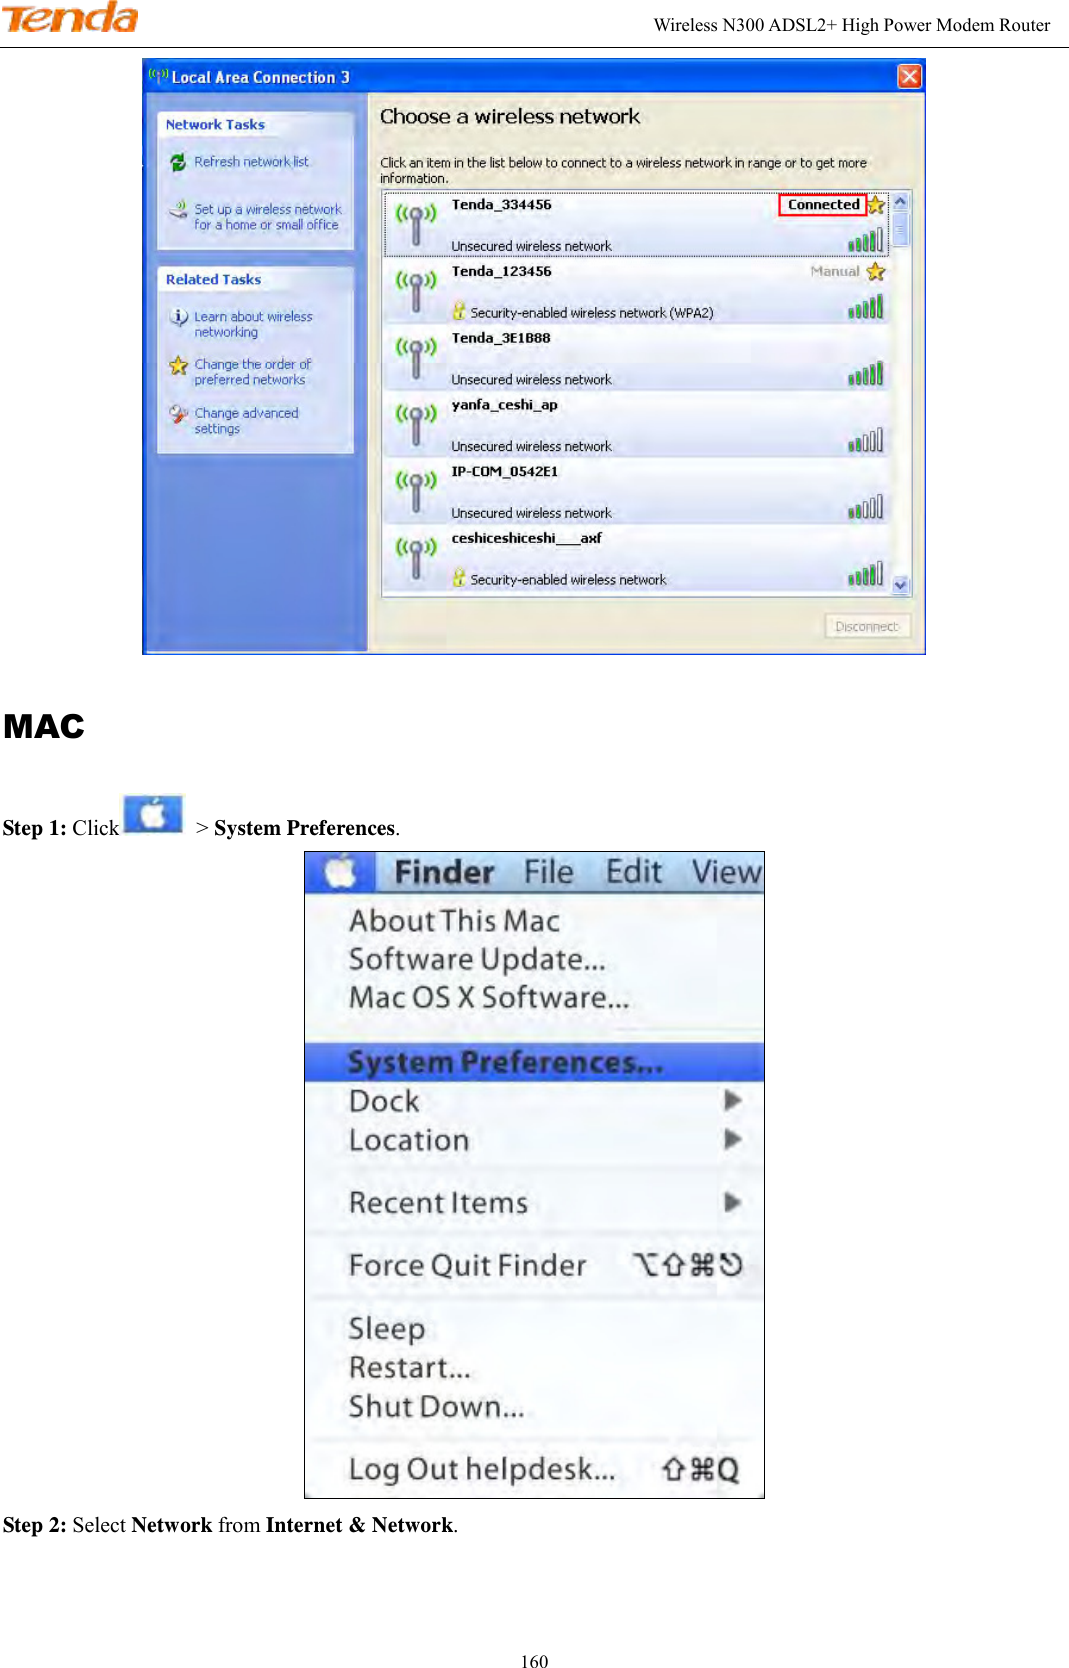                                                                                                               Wireless N300 ADSL2+ High Power Modem Router 160  MAC Step 1: Click   &gt; System Preferences.  Step 2: Select Network from Internet &amp; Network. 